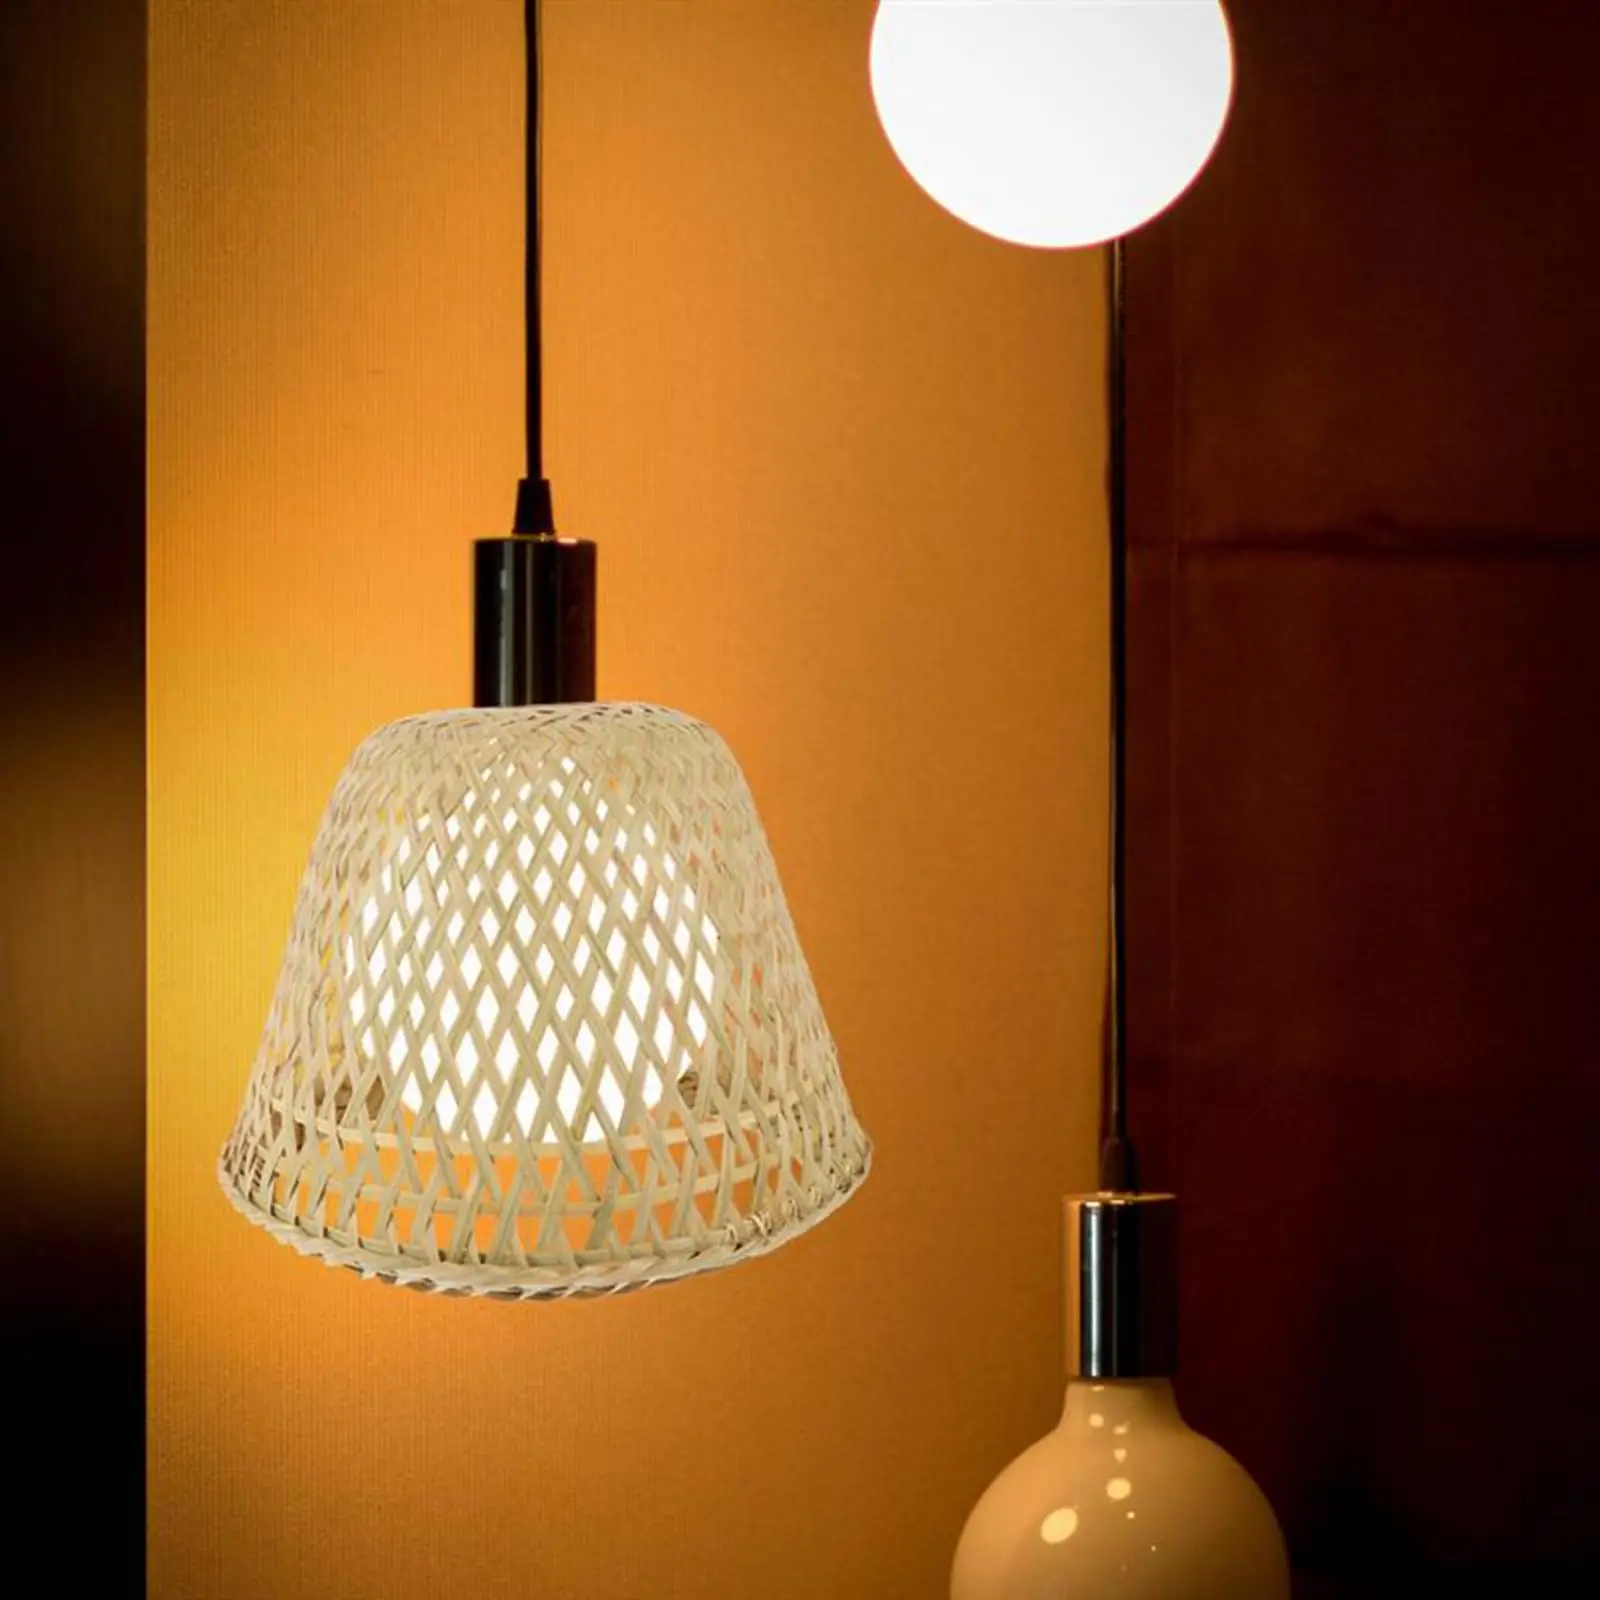 Bamboo Woven Pendant Light Shade Cover Lamp Cage Bulb Guard for Ceiling Light Lamp Holder Hanging Light Fixture Chandelier Cafe